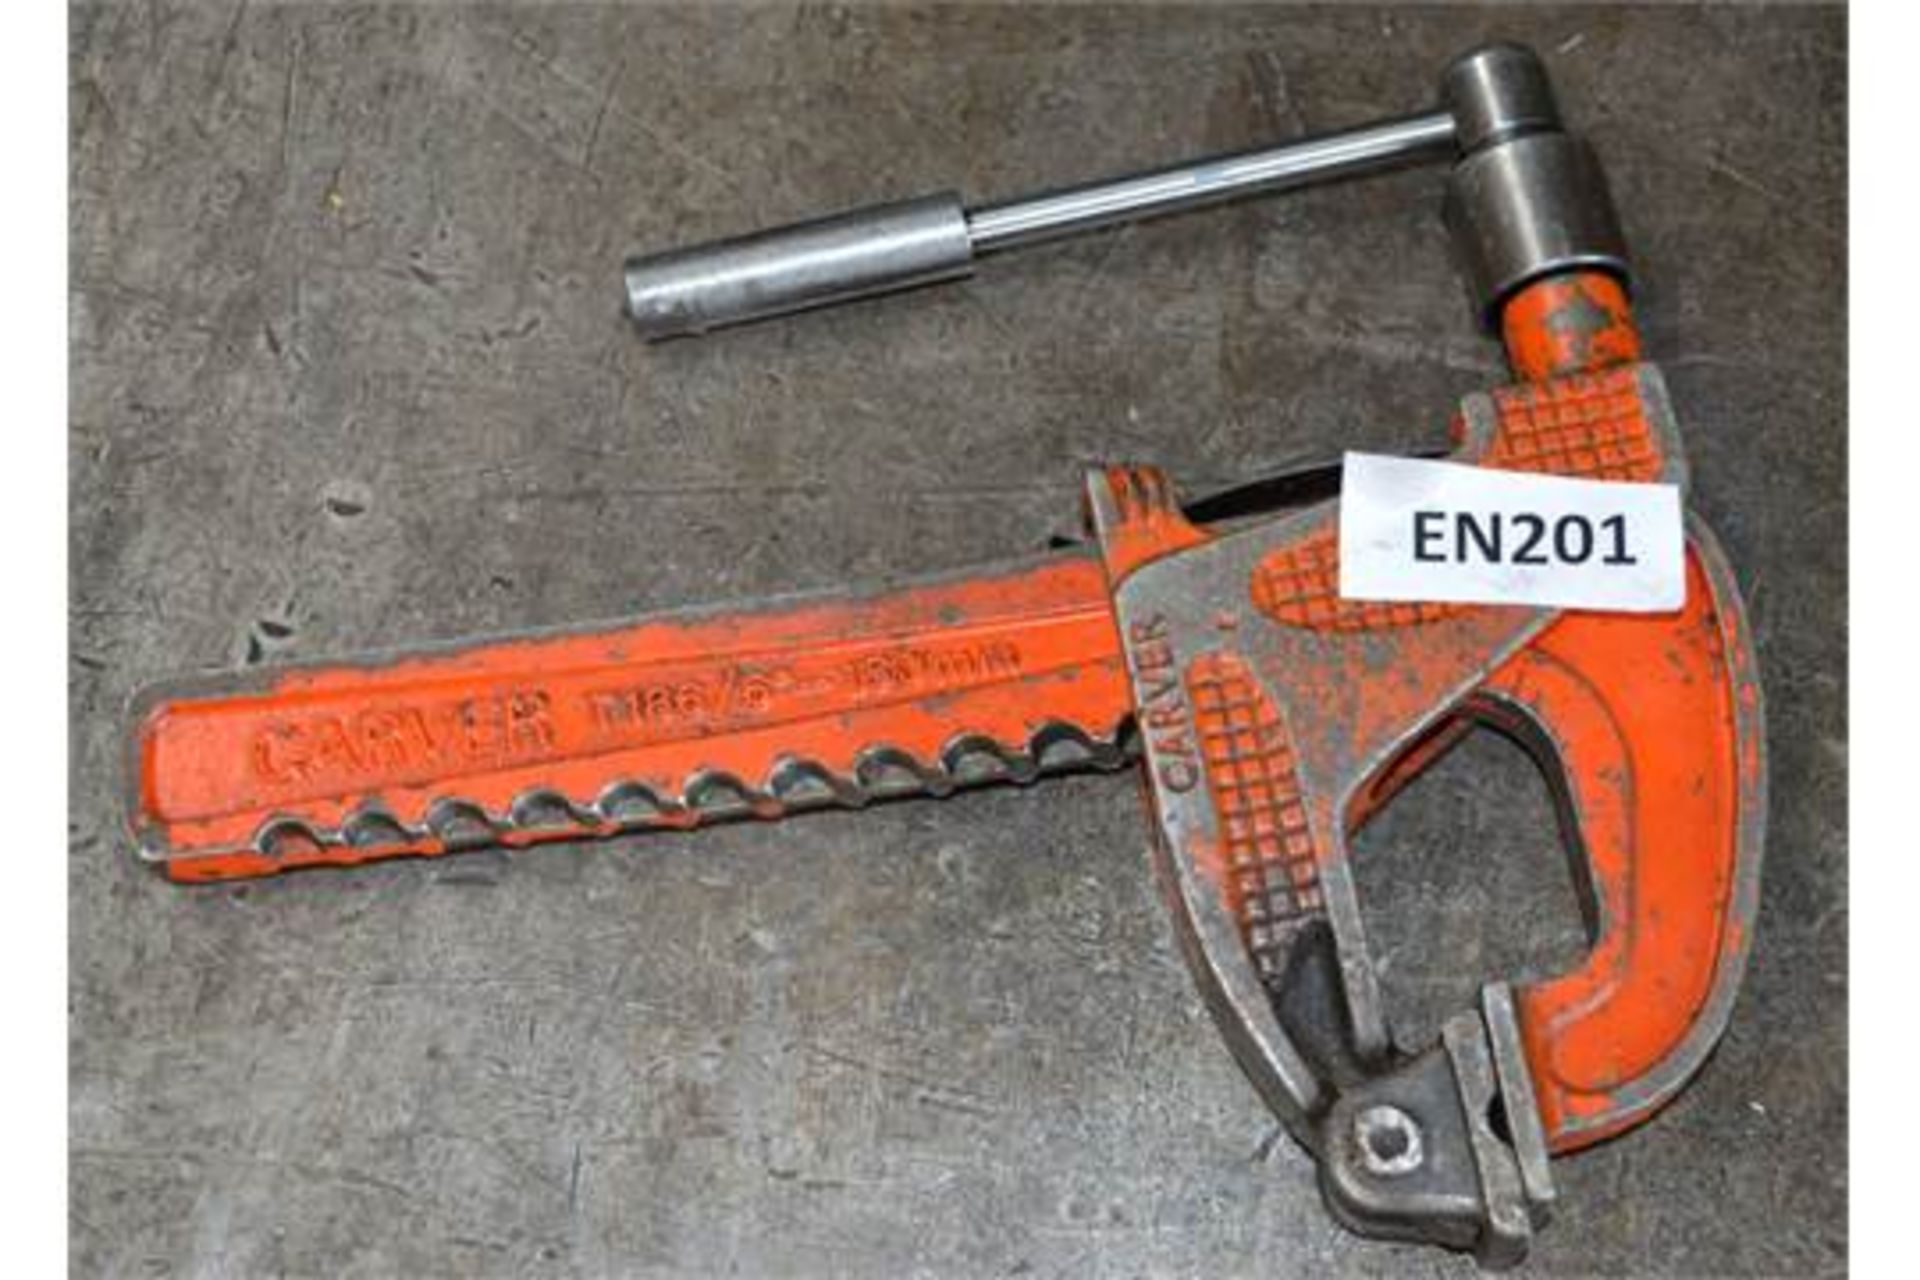 1 x Carver Heavy Duty Clamp - T186 6 Inch - CL202 -  Ref EN201 - Location: Worcester WR14